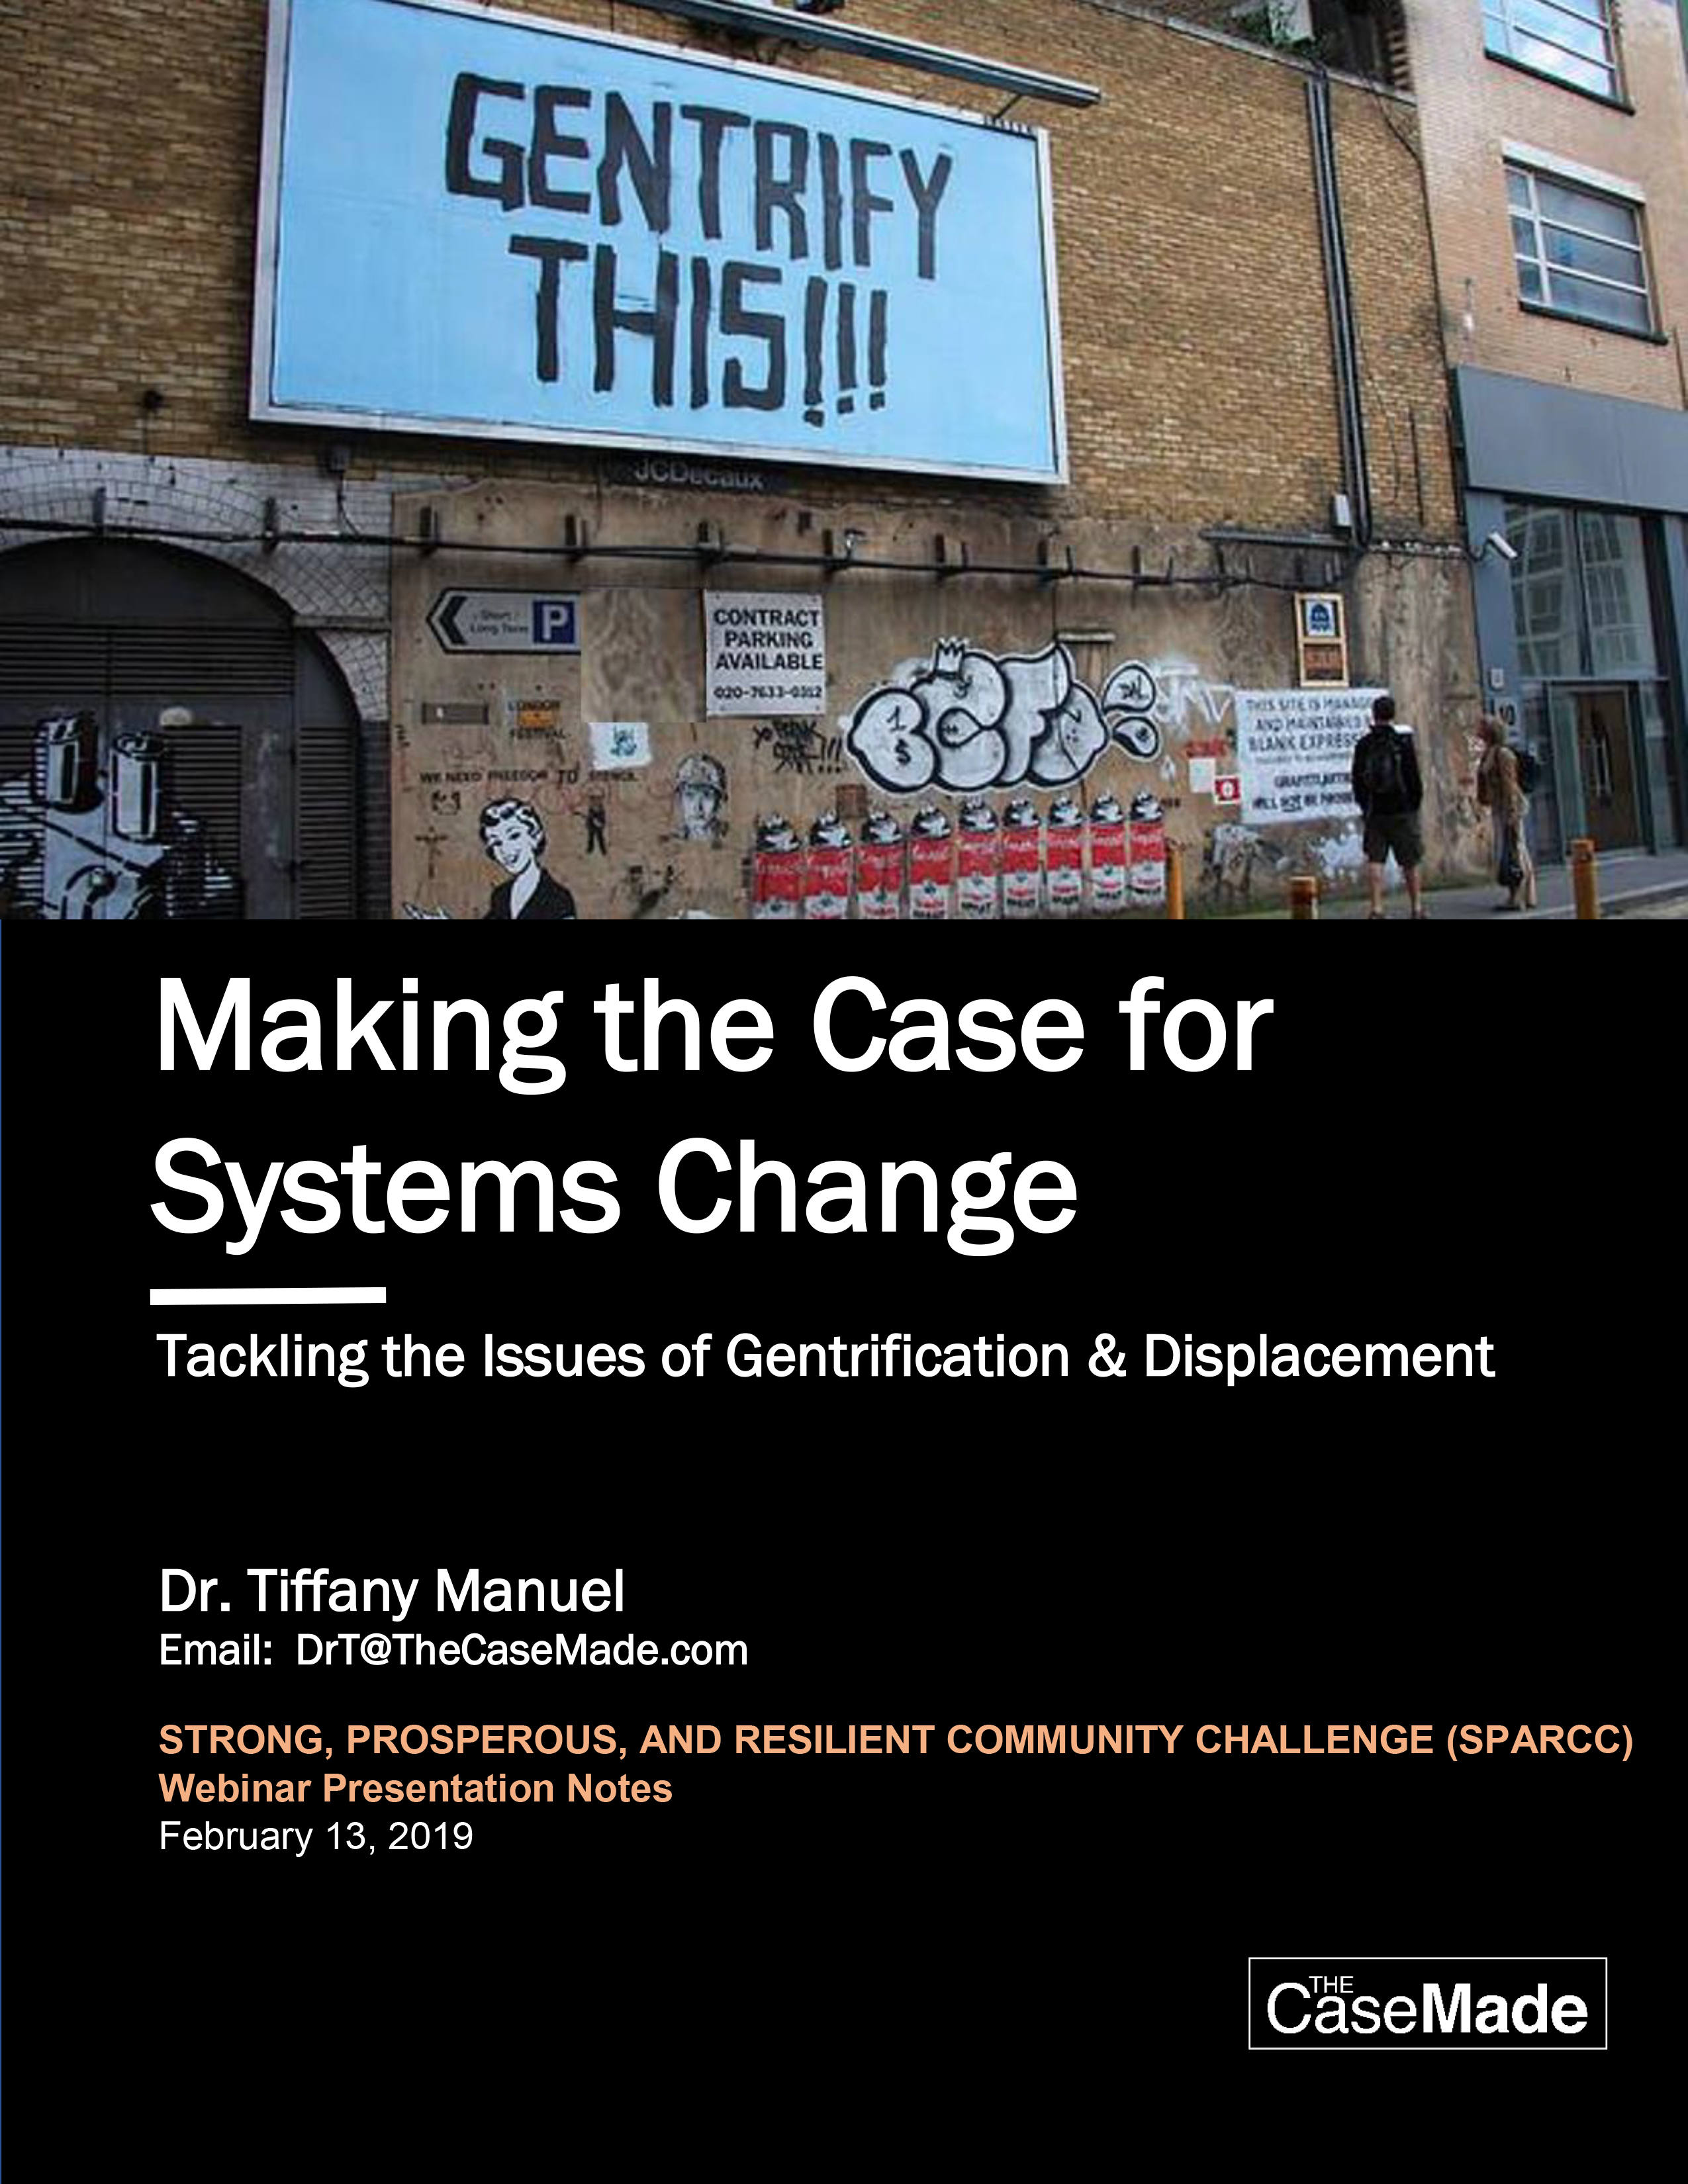 Cover of "Making the Case for Systems Change" including sign saying "gentrify this!"